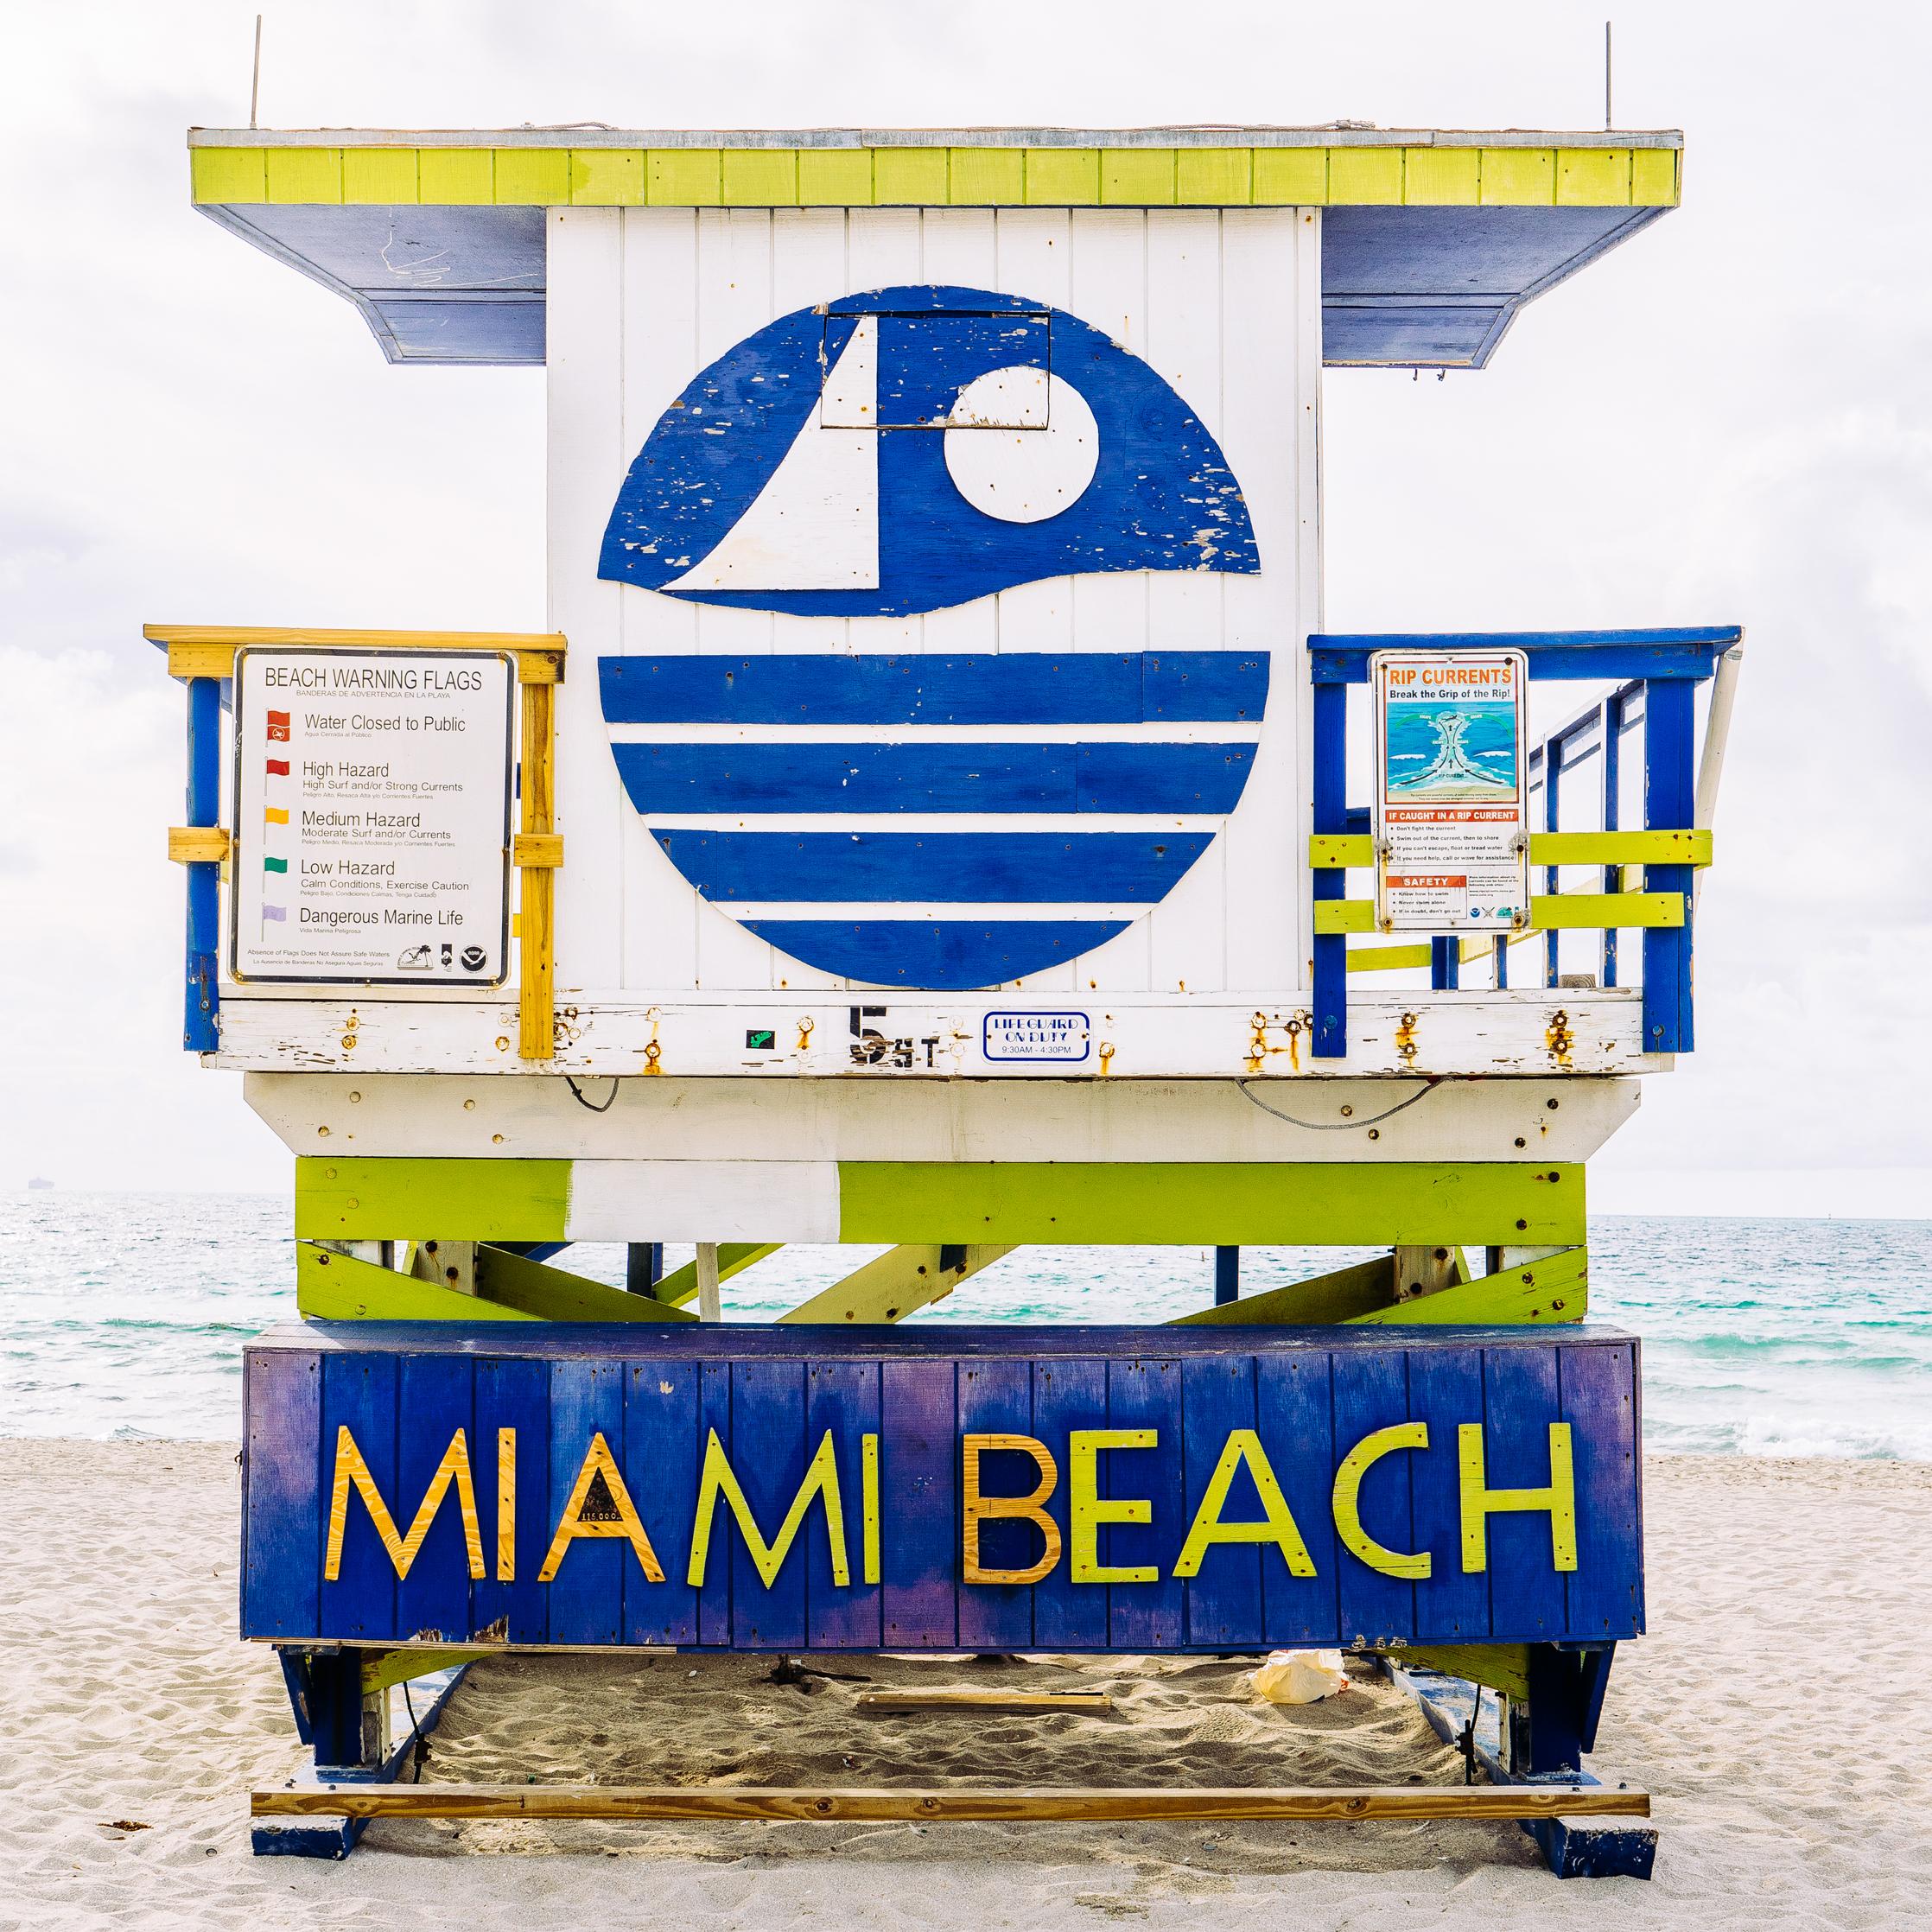 Peter Mendelson Abstract Photograph - "Miami Beach Lifeguard Stand - Rear View, " Contemporary Photograph, 20" x 20"